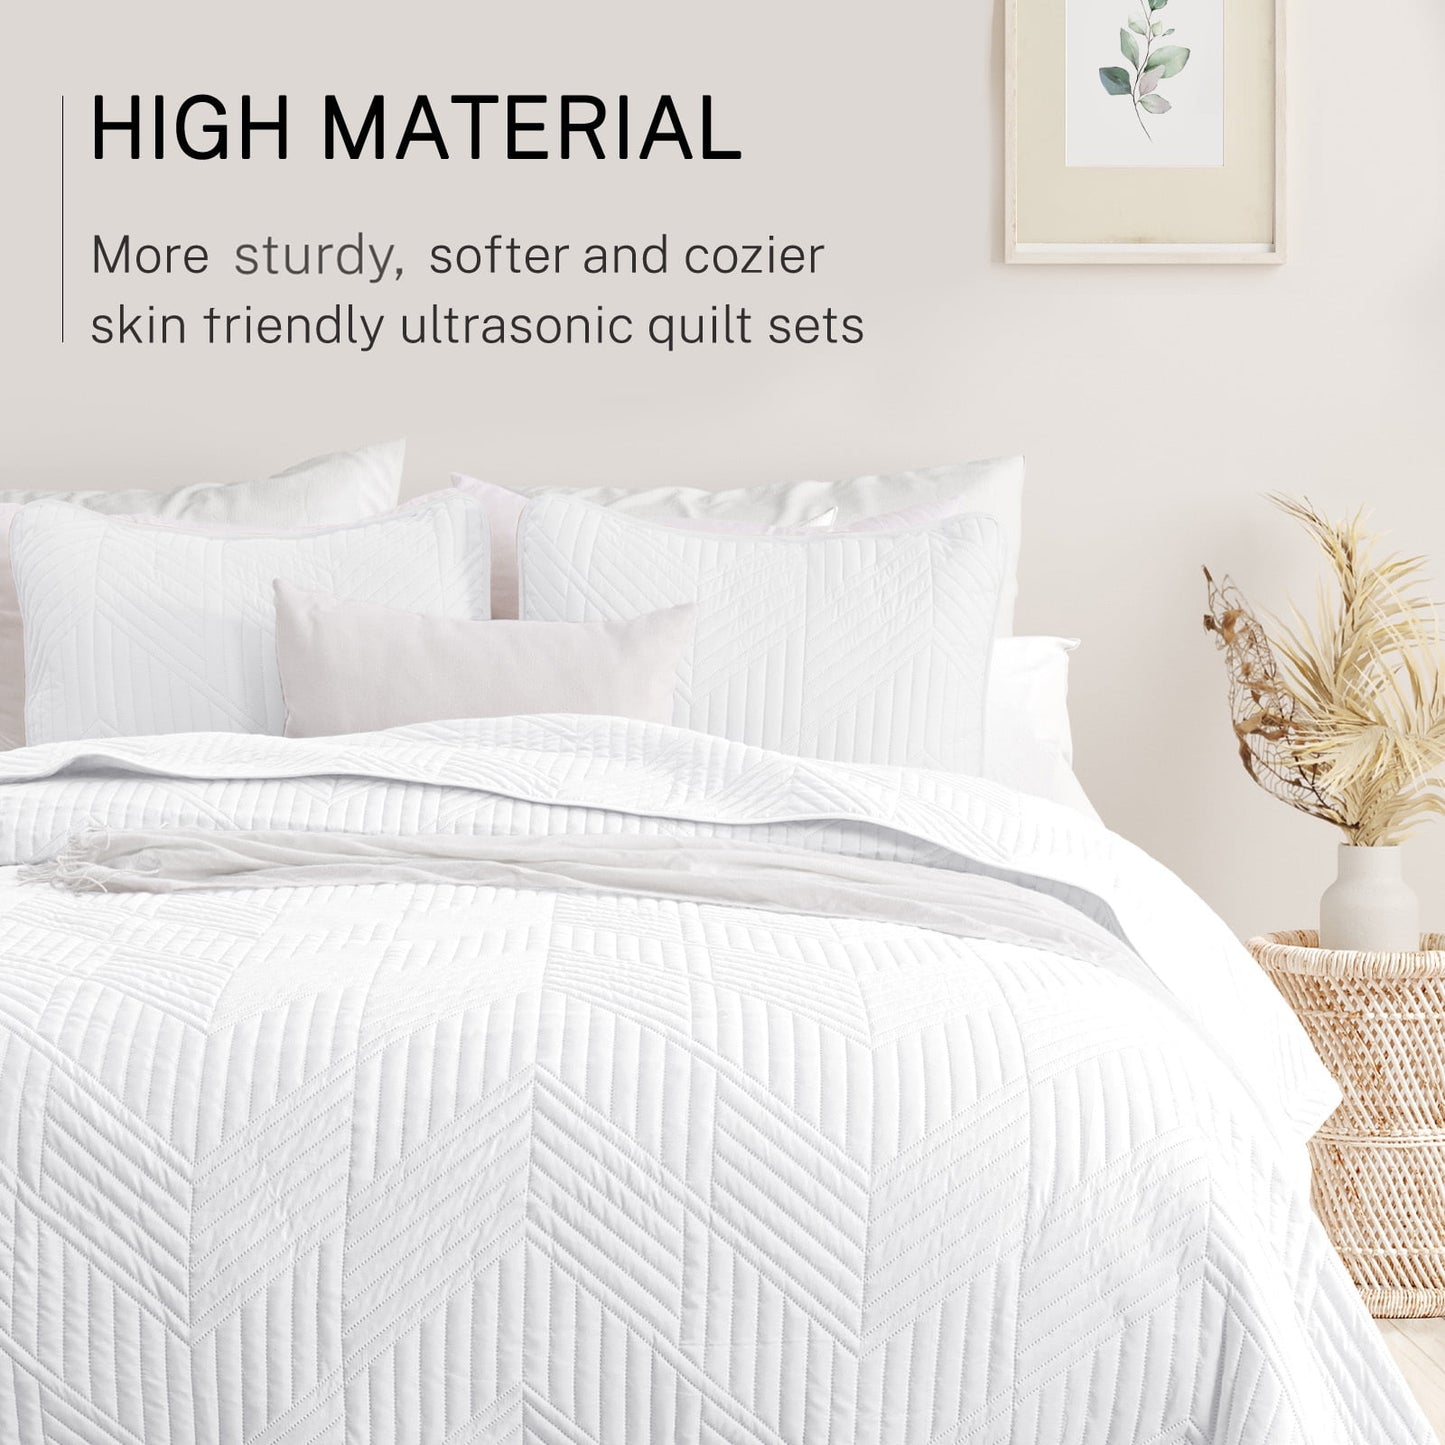 Exclusivo Mezcla California King Quilt Bedding Set, Lightweight White Oversized King Bedspreads Soft Modern Geometric Coverlet Set for All Seasons (1 Quilt and 2 Pillow Shams)